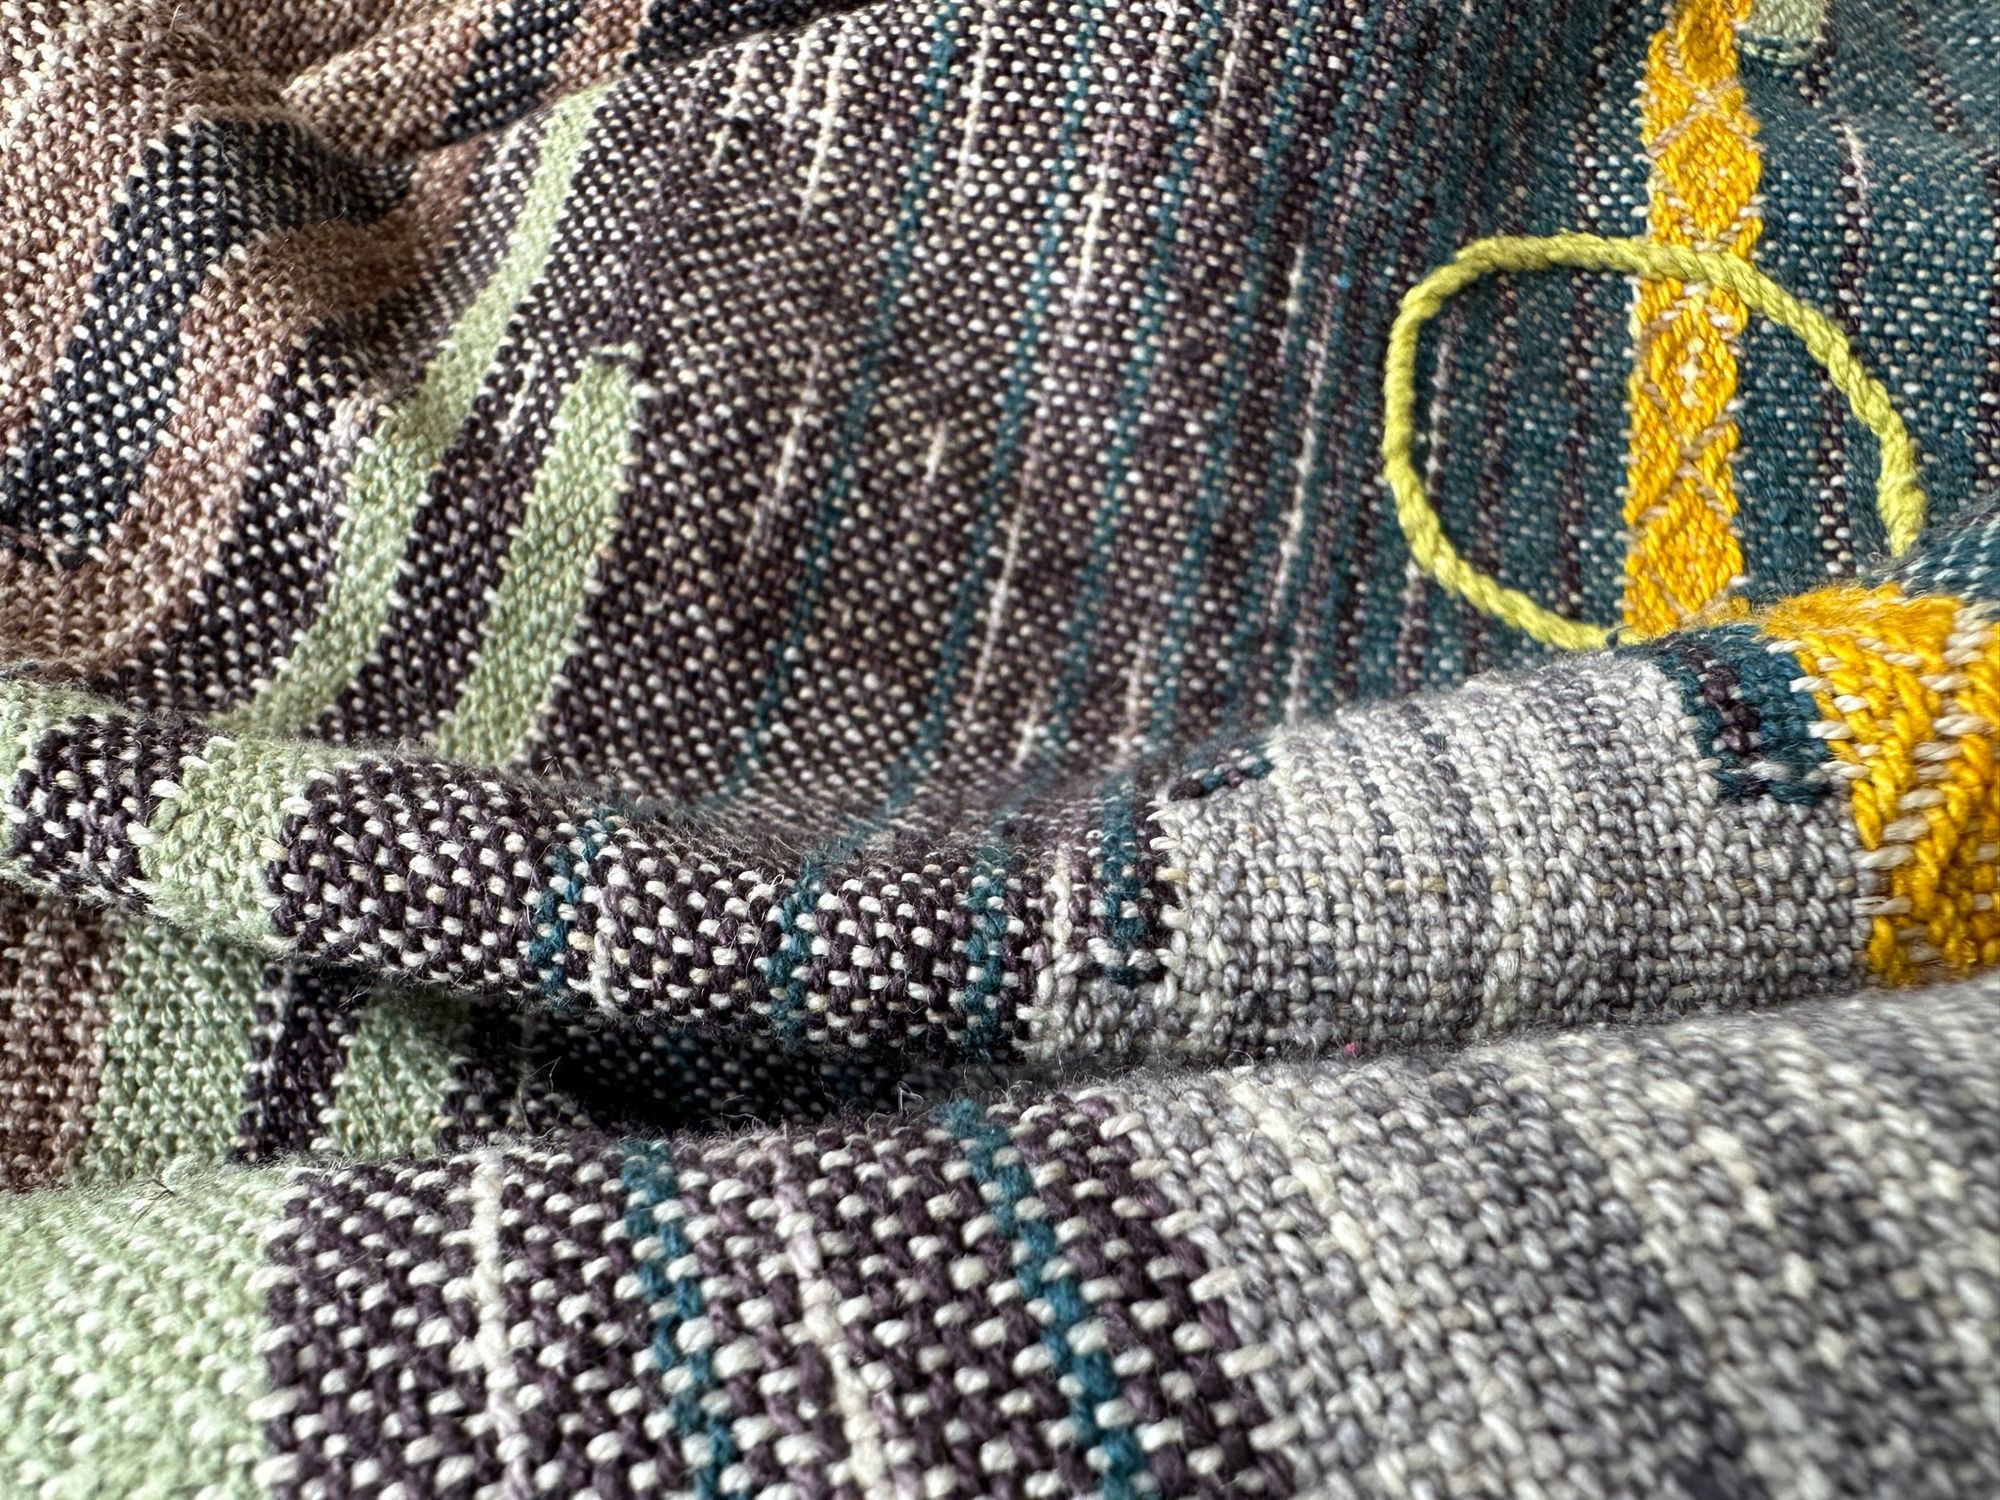 A detail of raw silk handwoven fabric in a rainbow of hand dyed colors with circular moon-like details 